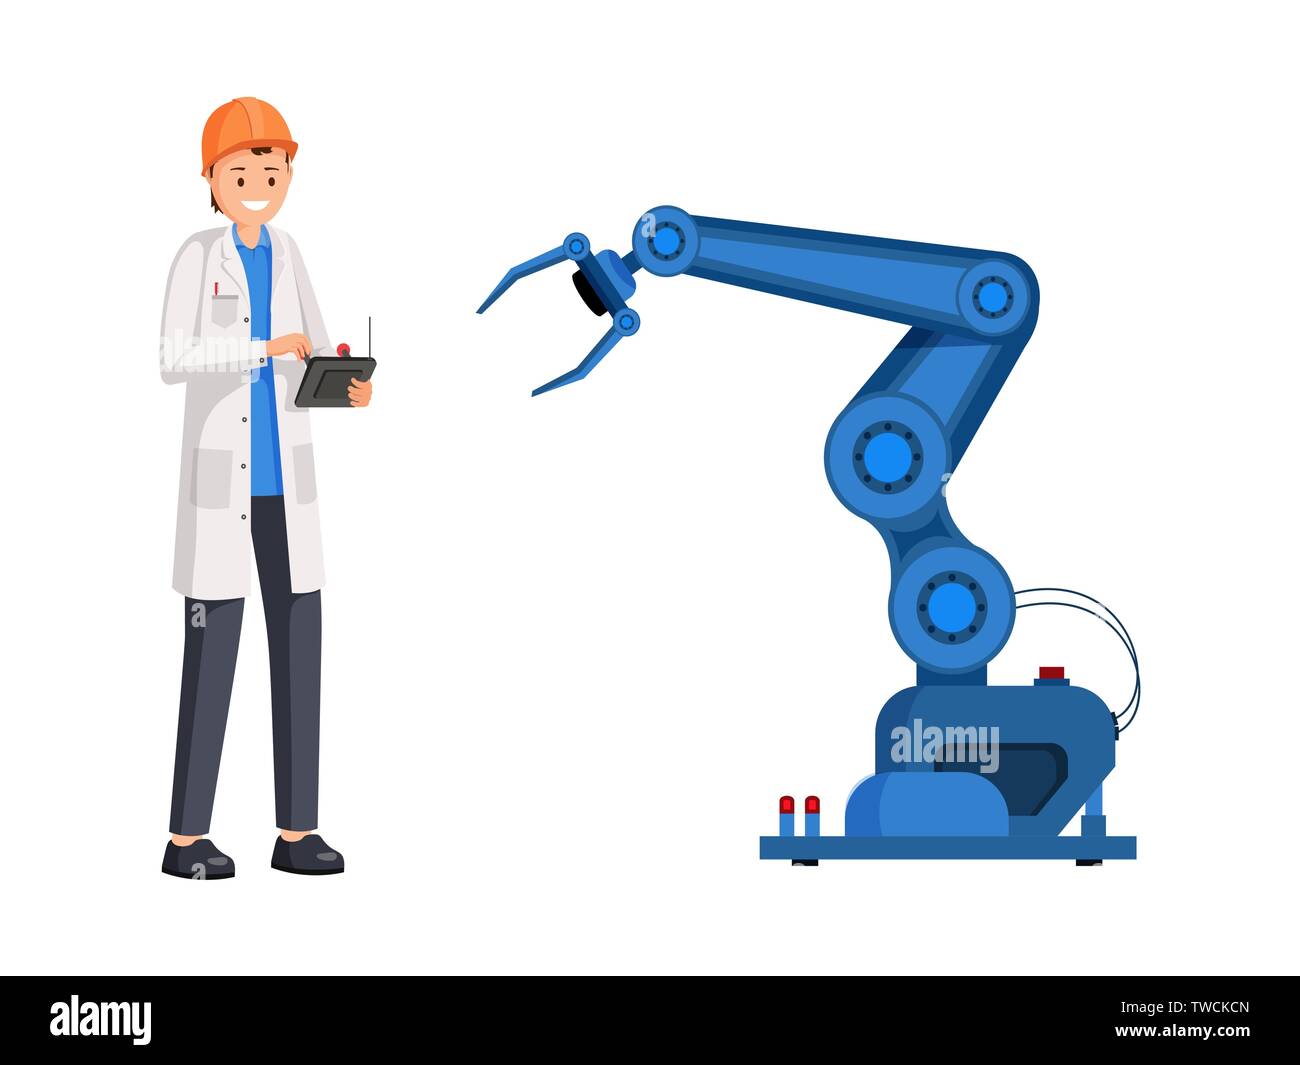 Engineer operate robotic arm flat illustration. Smart industry, automatic manufacturing, industrial revolution. Scientist, mechanic setting futuristic technologies isolated cartoon character Stock Vector